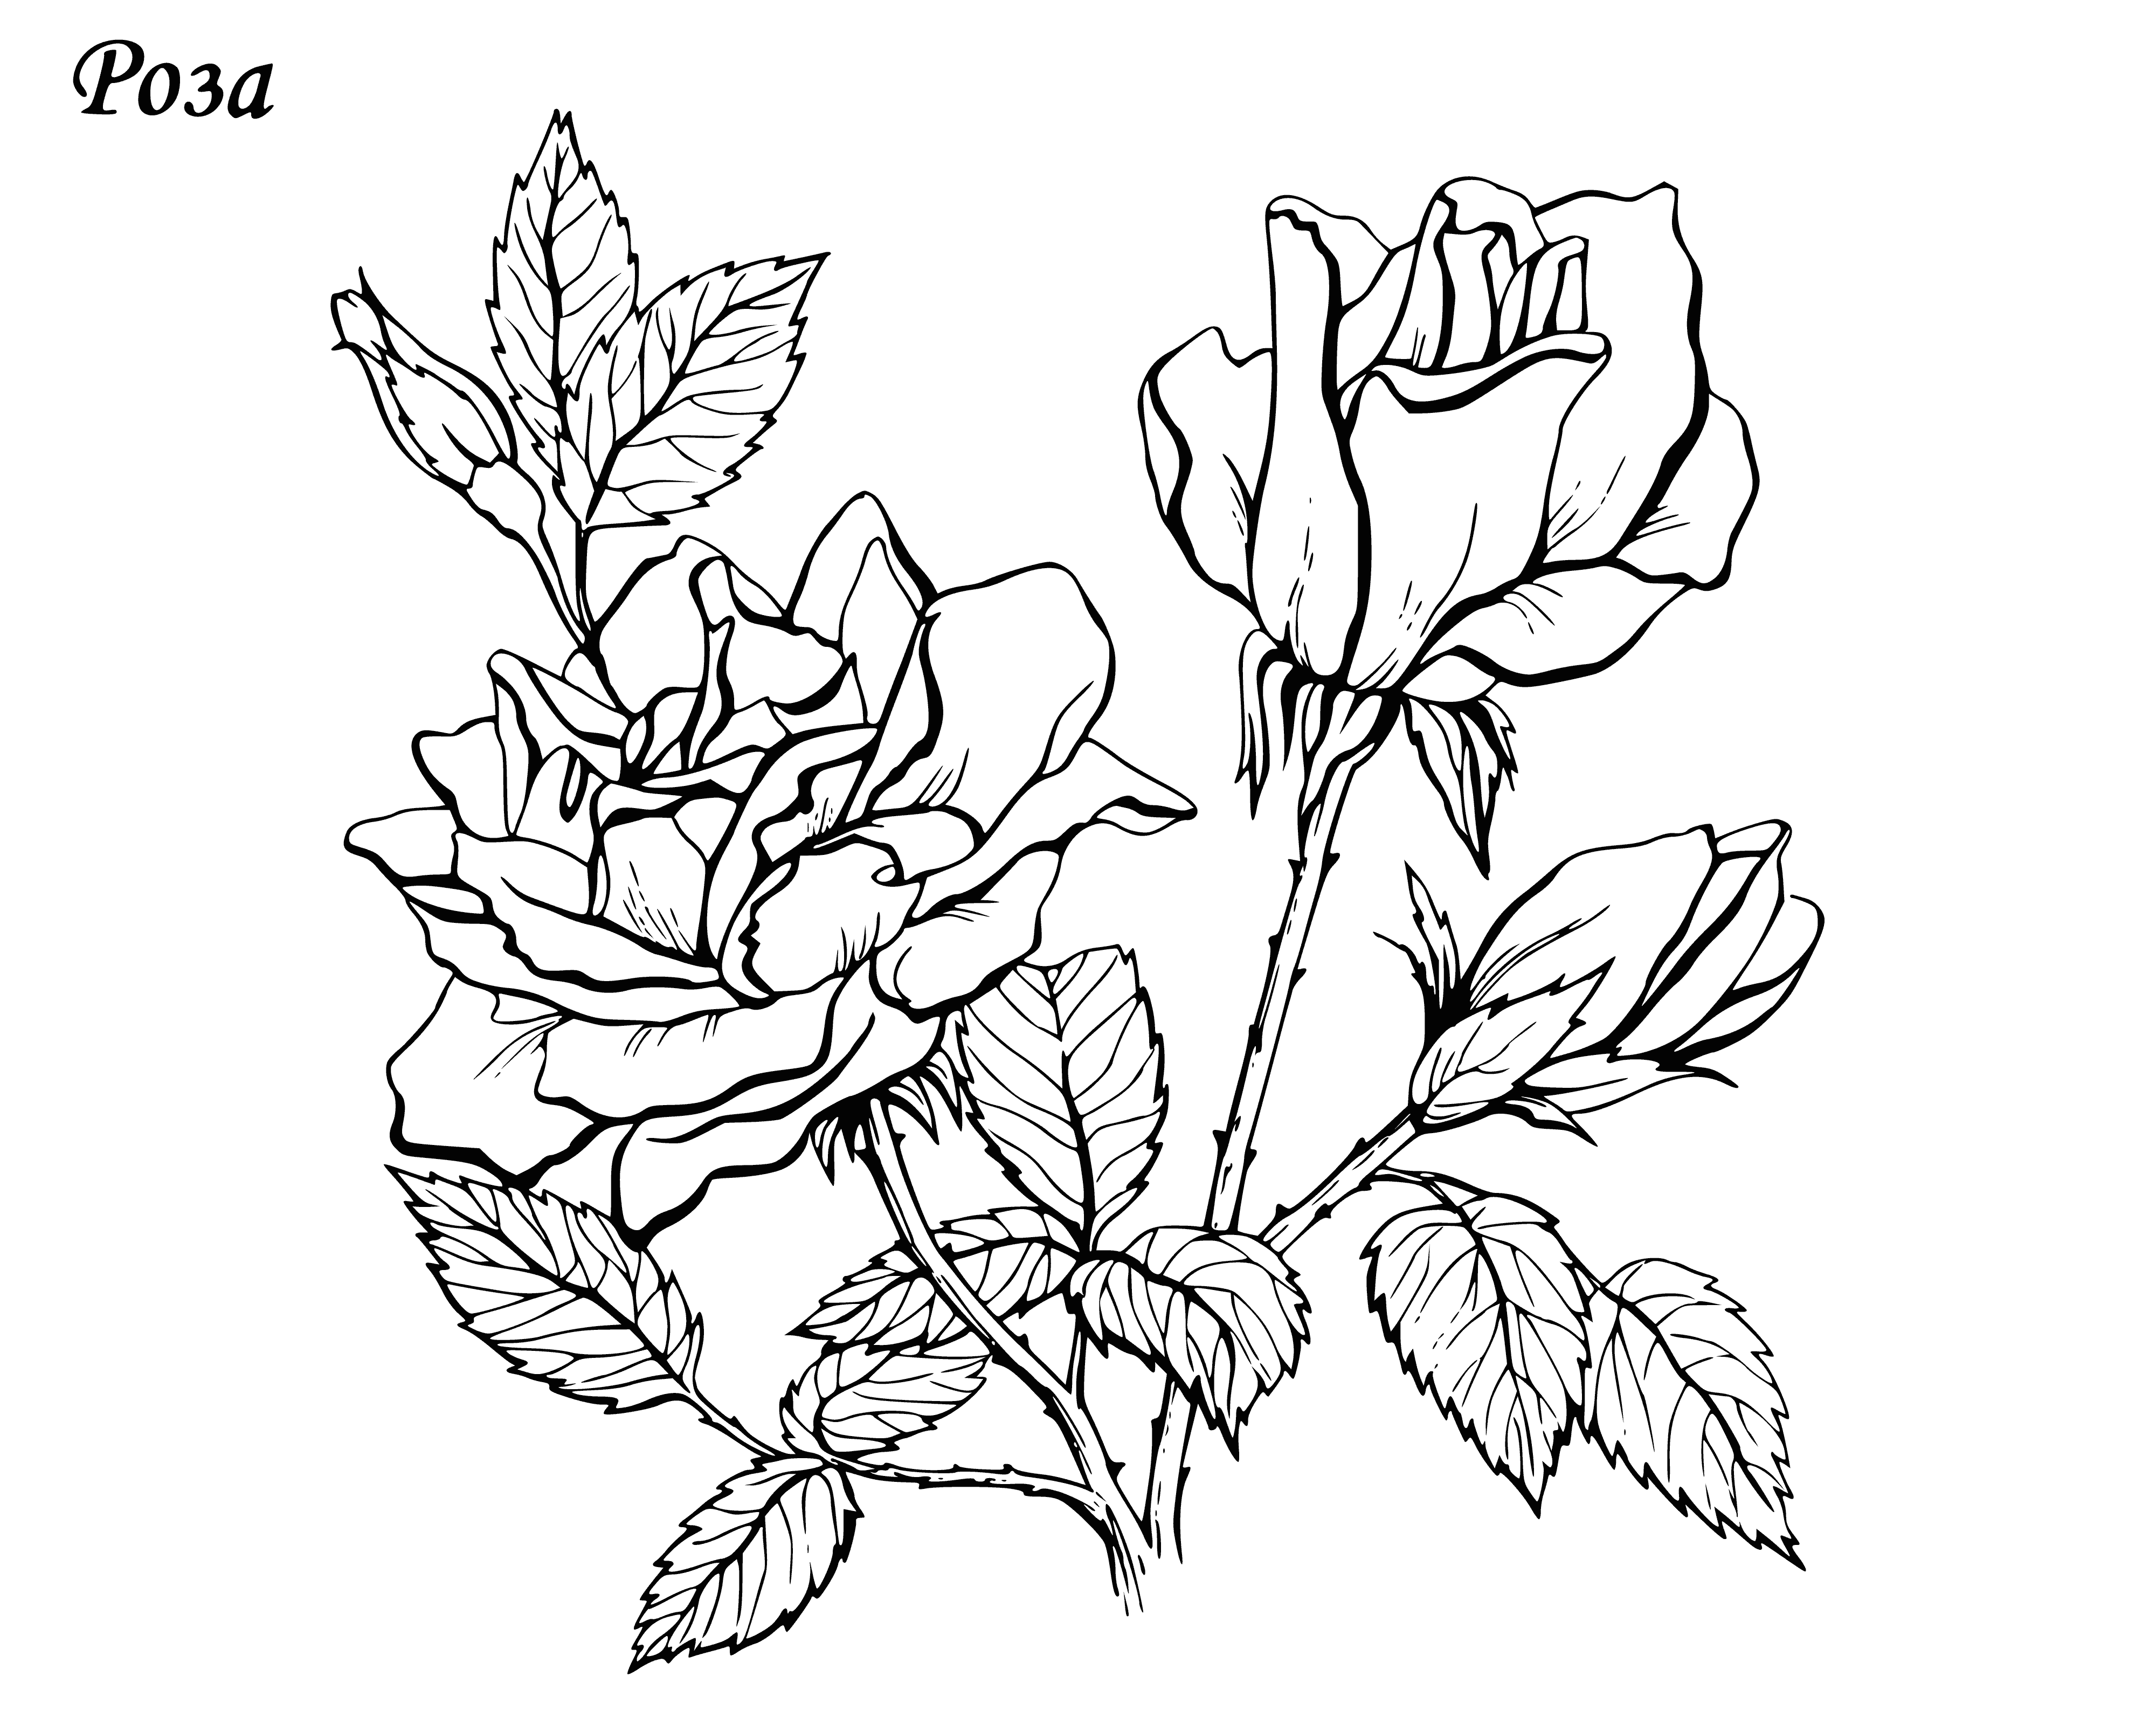 Roses coloring page